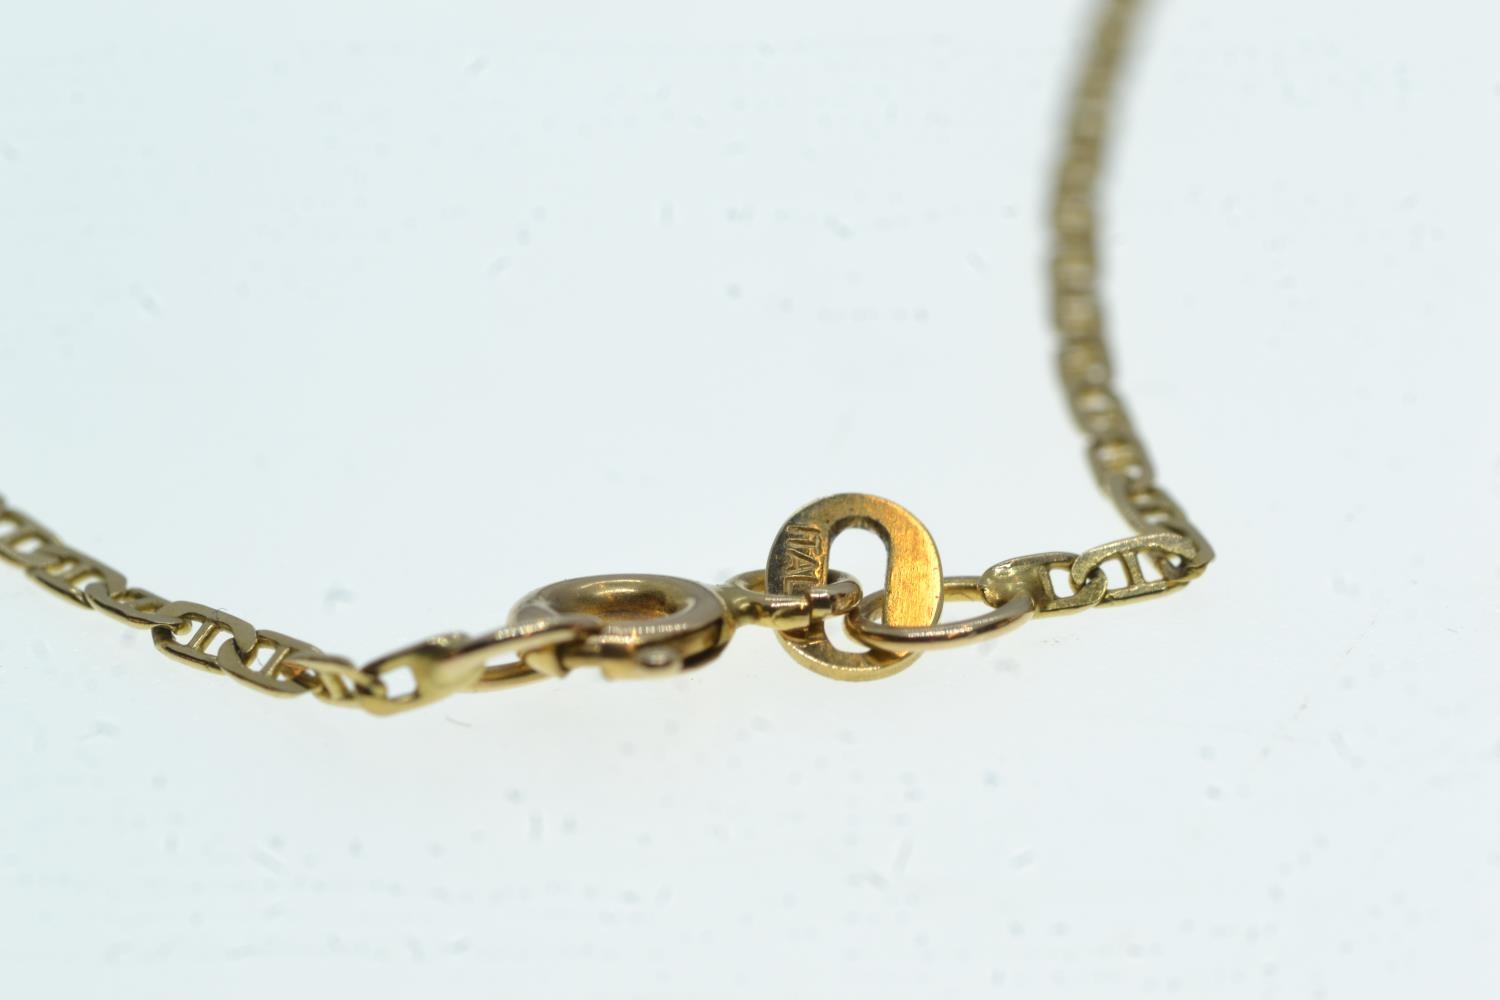 9ct gold & diamond pendant, with a 9ct gold chain, pendant length 17mm, chain circumference 455mm, g - Image 2 of 3